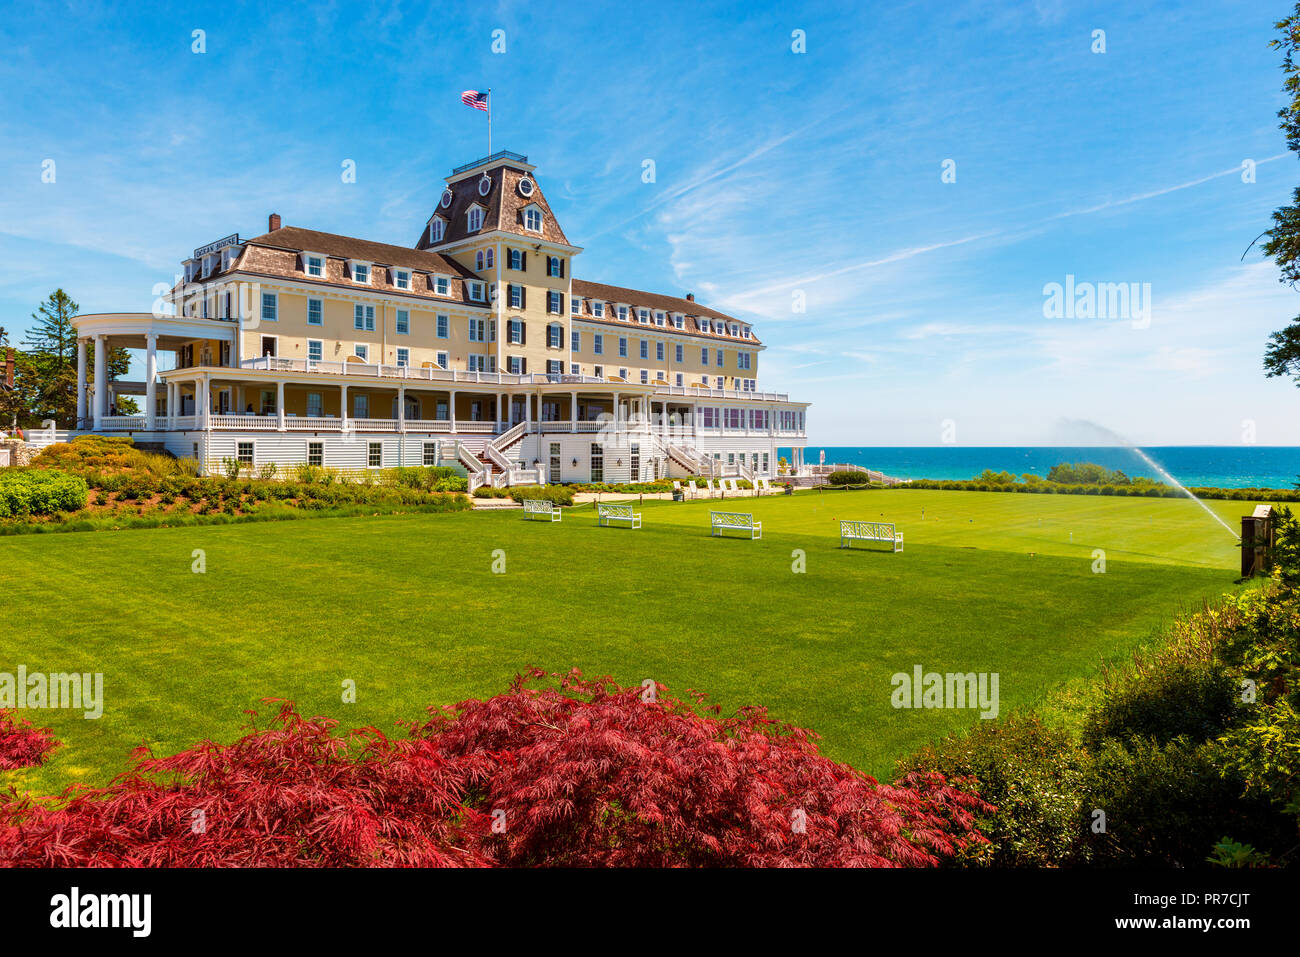 The Ocean House in Westerly, Rhode Island, USA. It is a large, Victorian-style luxury waterfront hotel, originally built in 1868. Stock Photo